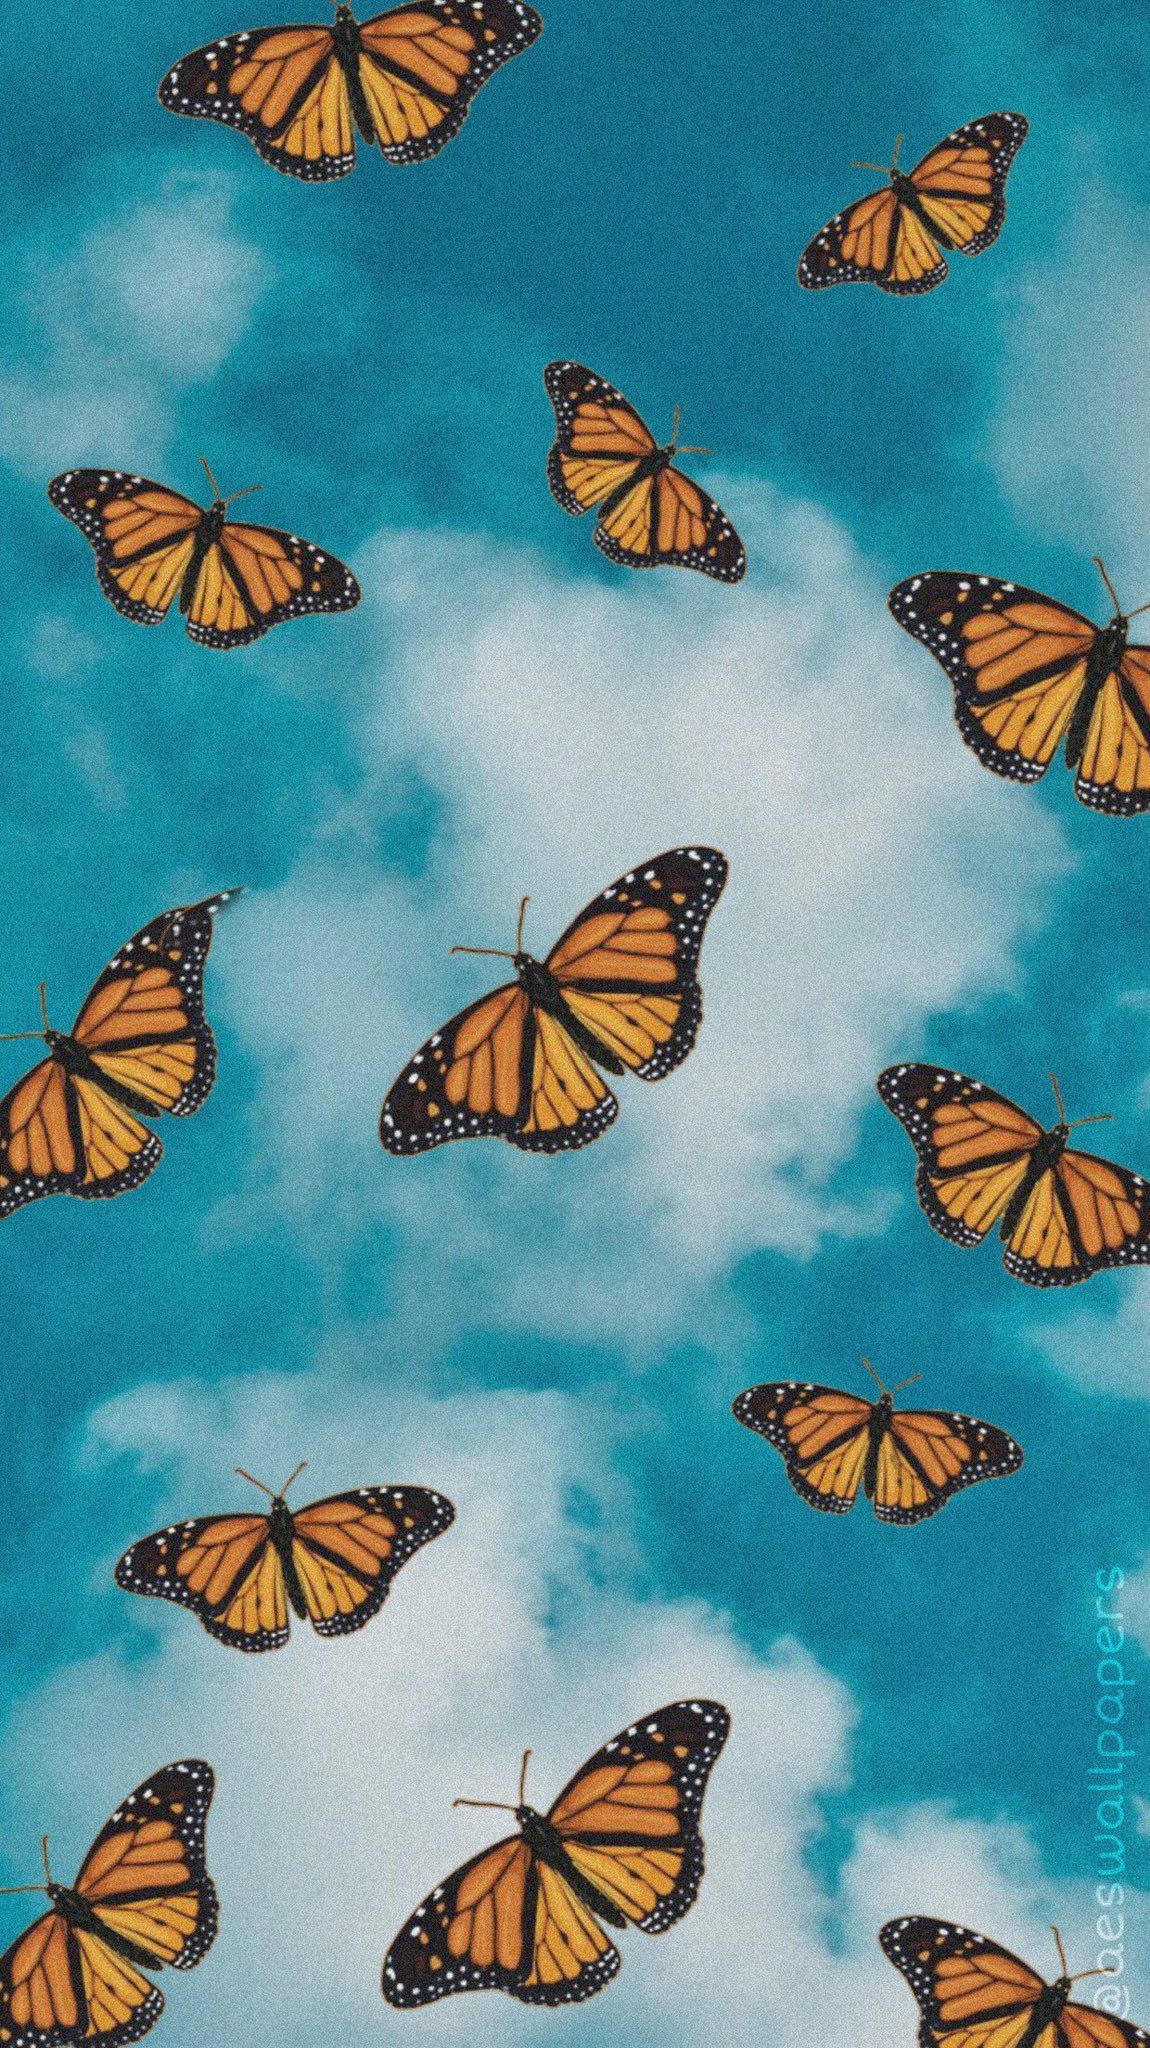 Monarch butterflies against a blue sky background - Tiger